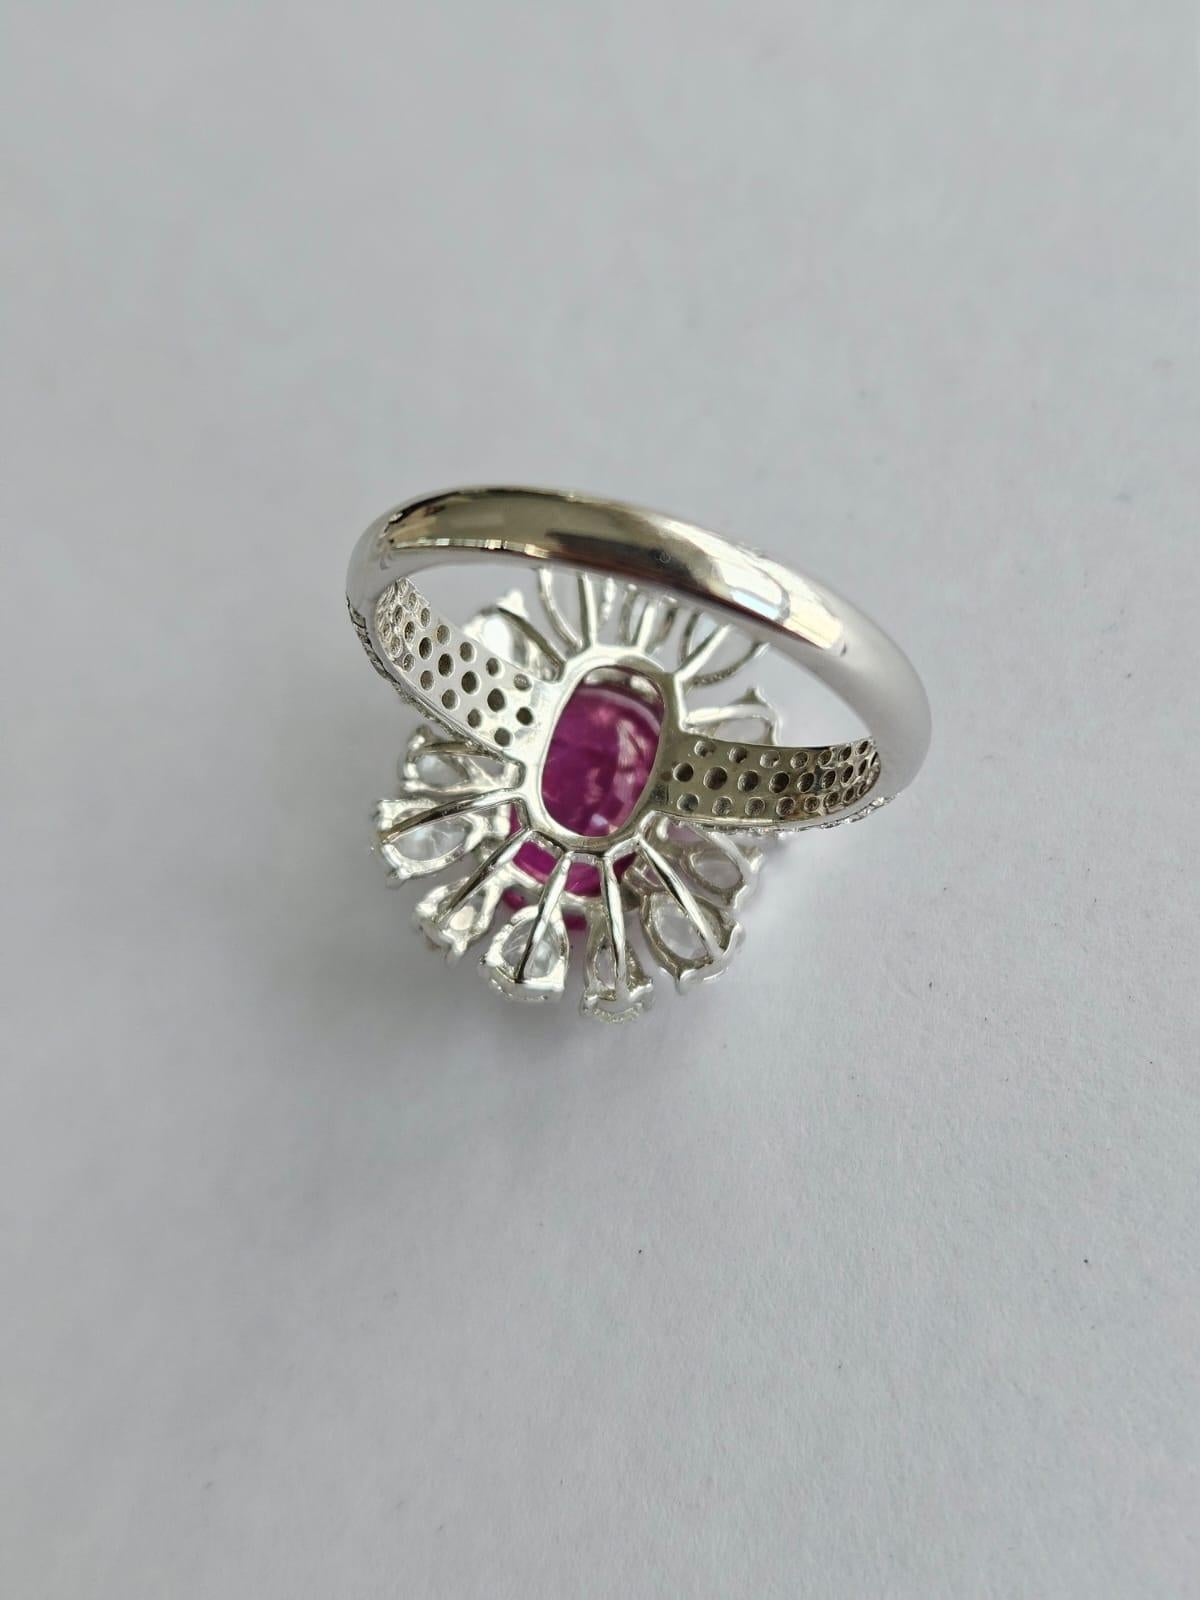 A very gorgeous and special, modern style, Ruby Engagement Ring set in 18K White Gold & Diamonds. The weight of the Ruby is 3.71 carats. The Ruby is completely natural, without any treatment & is of Burmese origin. The combined Diamonds weight is